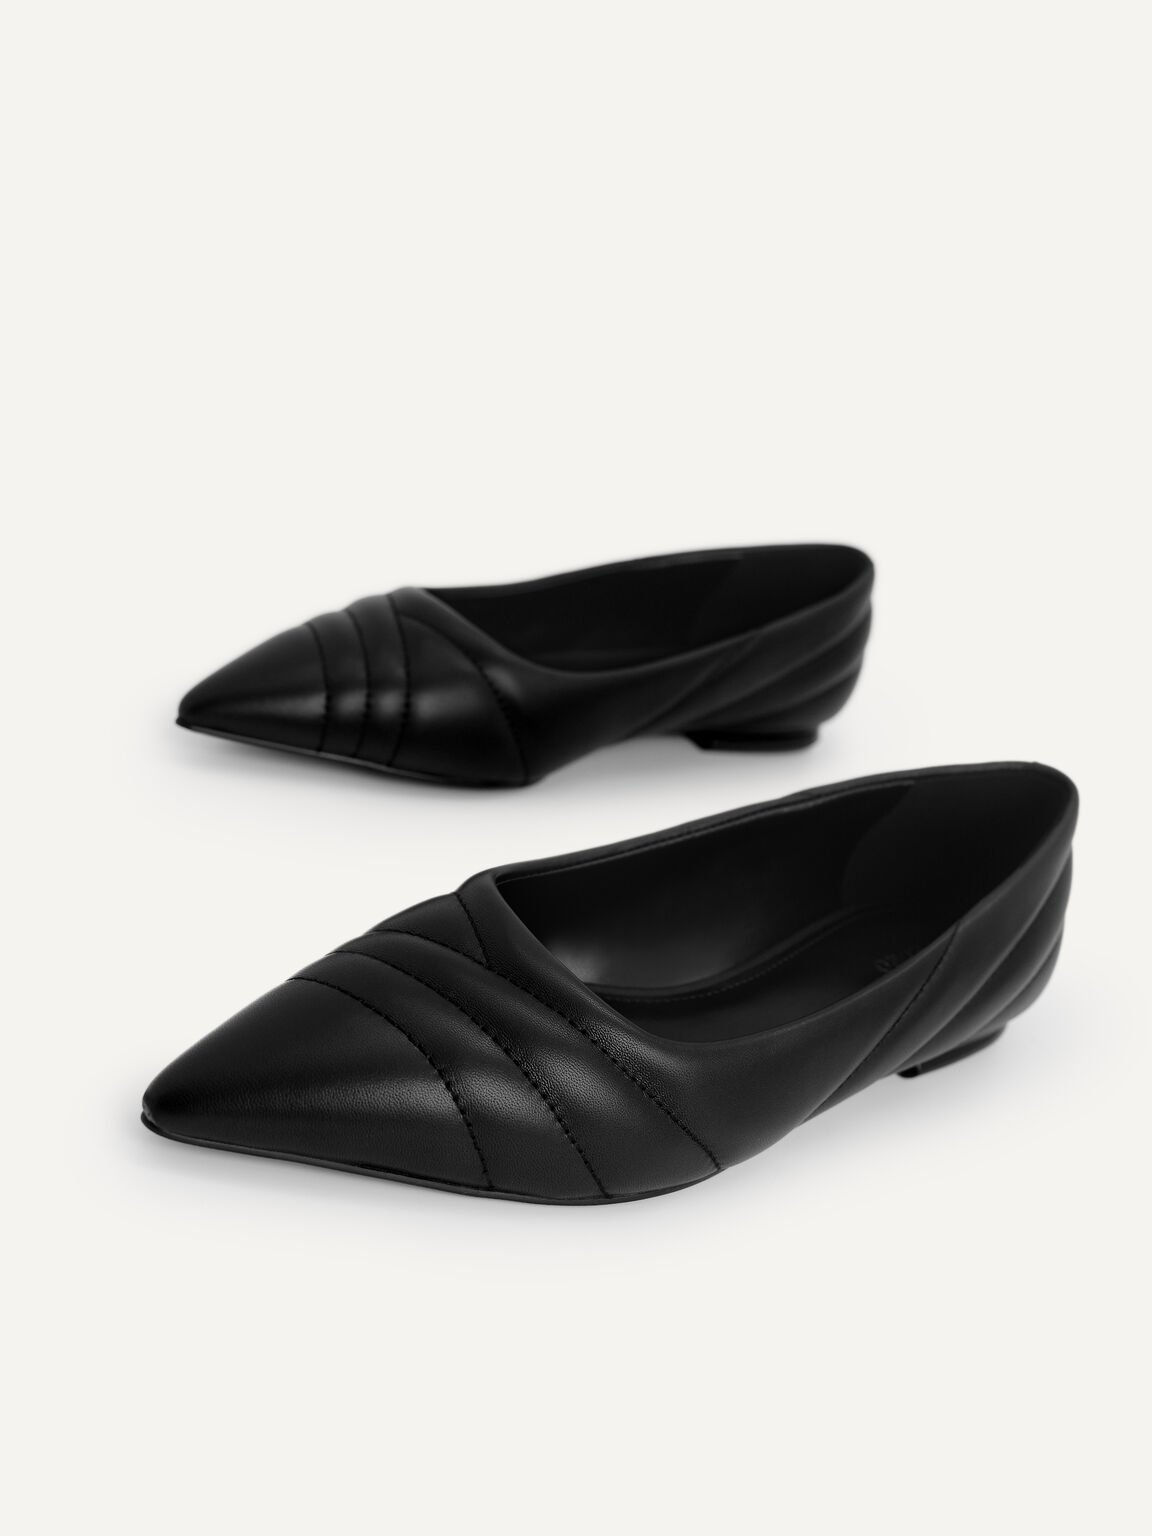 Pointed Toe Leather Flats, Black